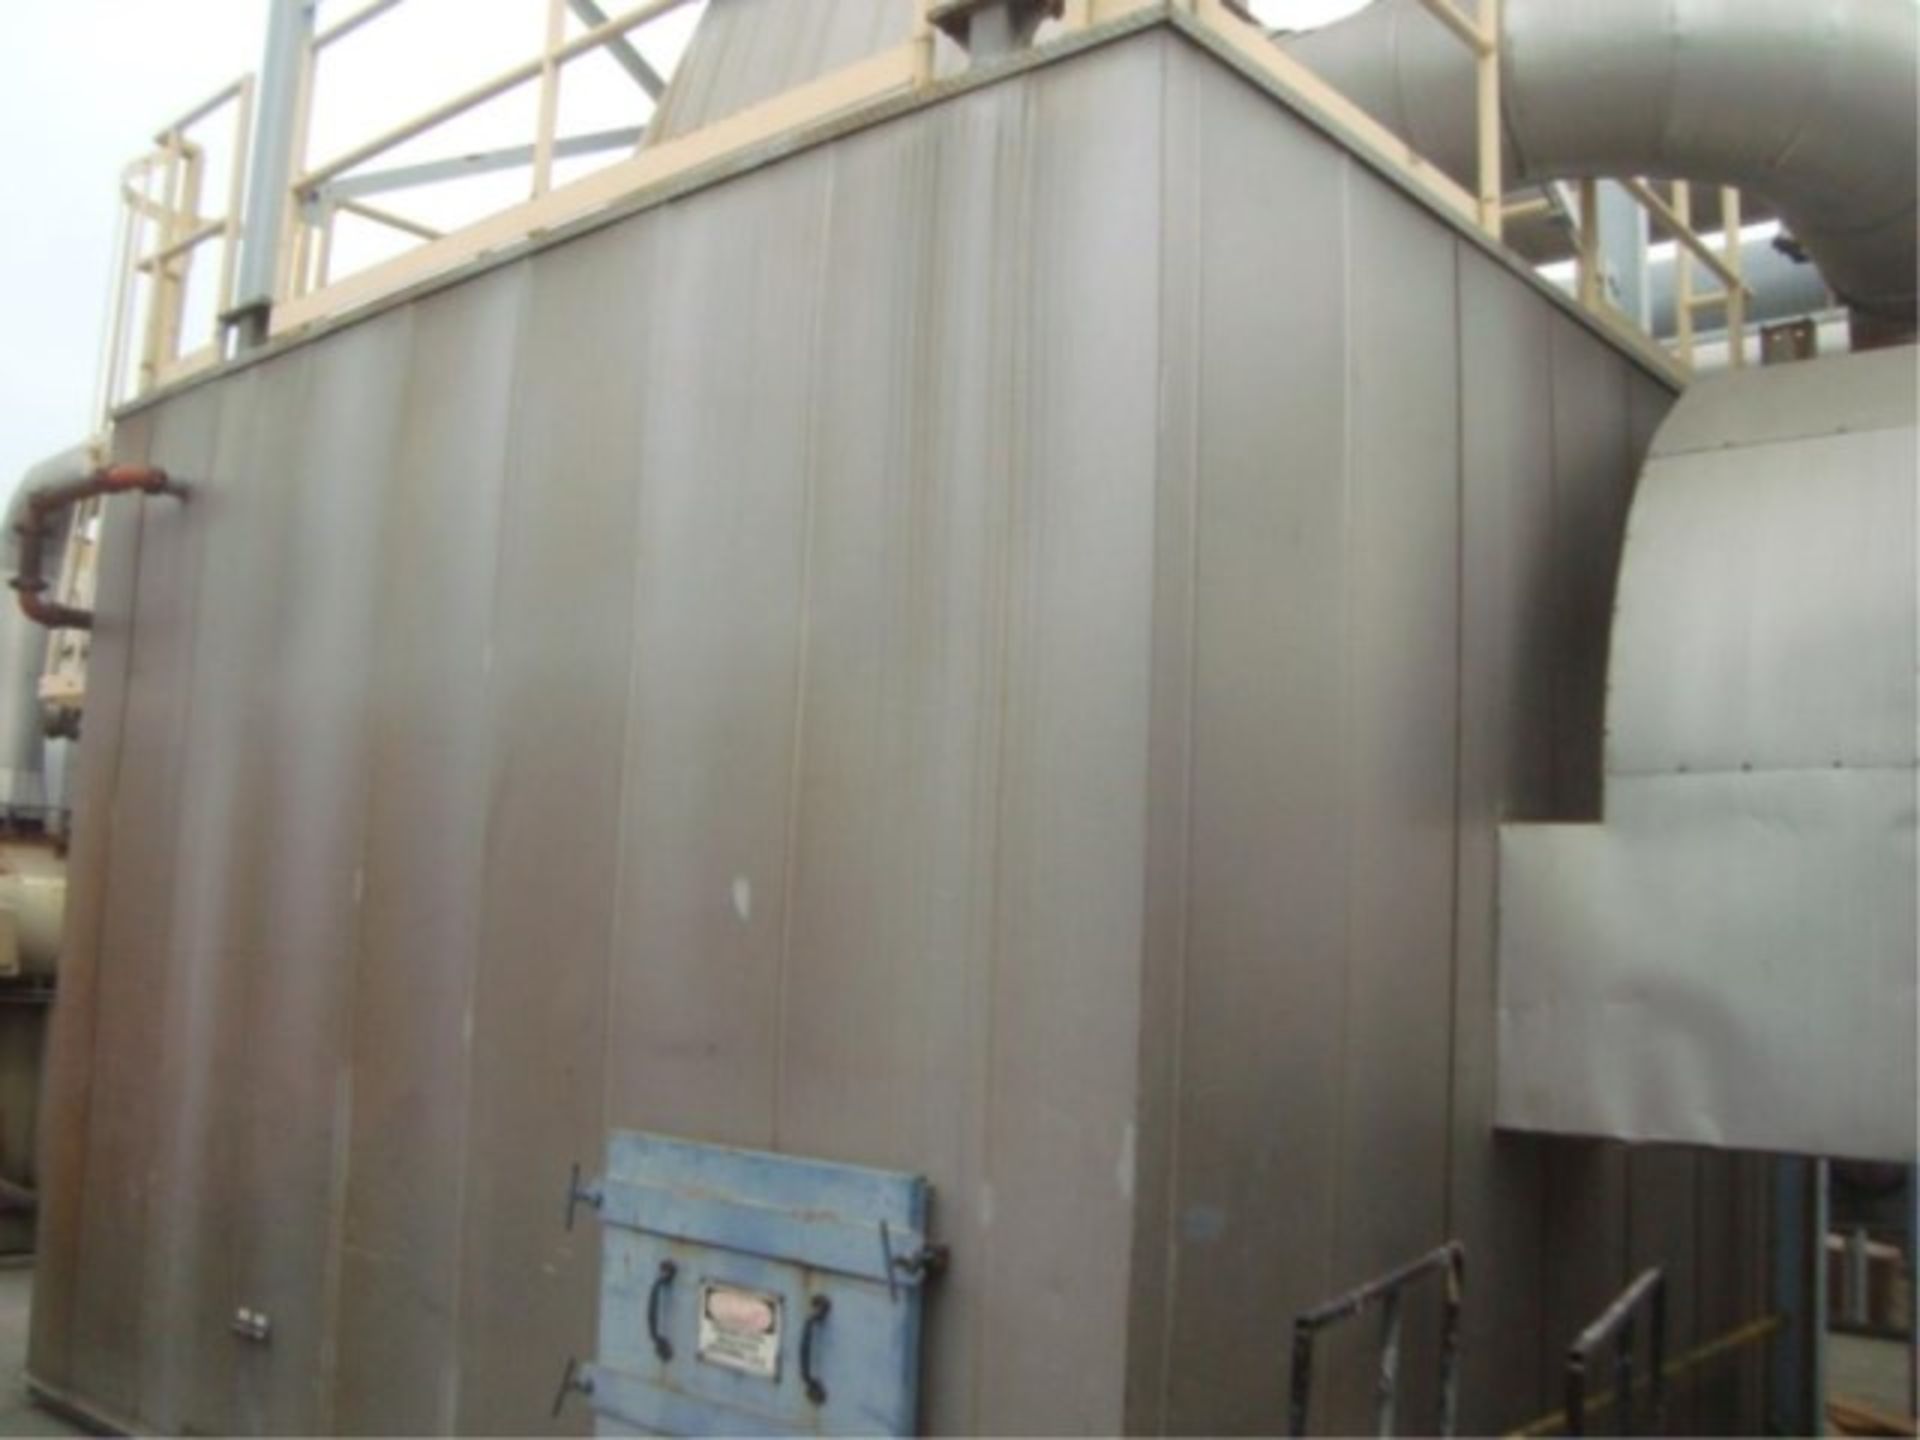 Reeco Re-Therm Fume Scrub Abatement System - Image 19 of 20